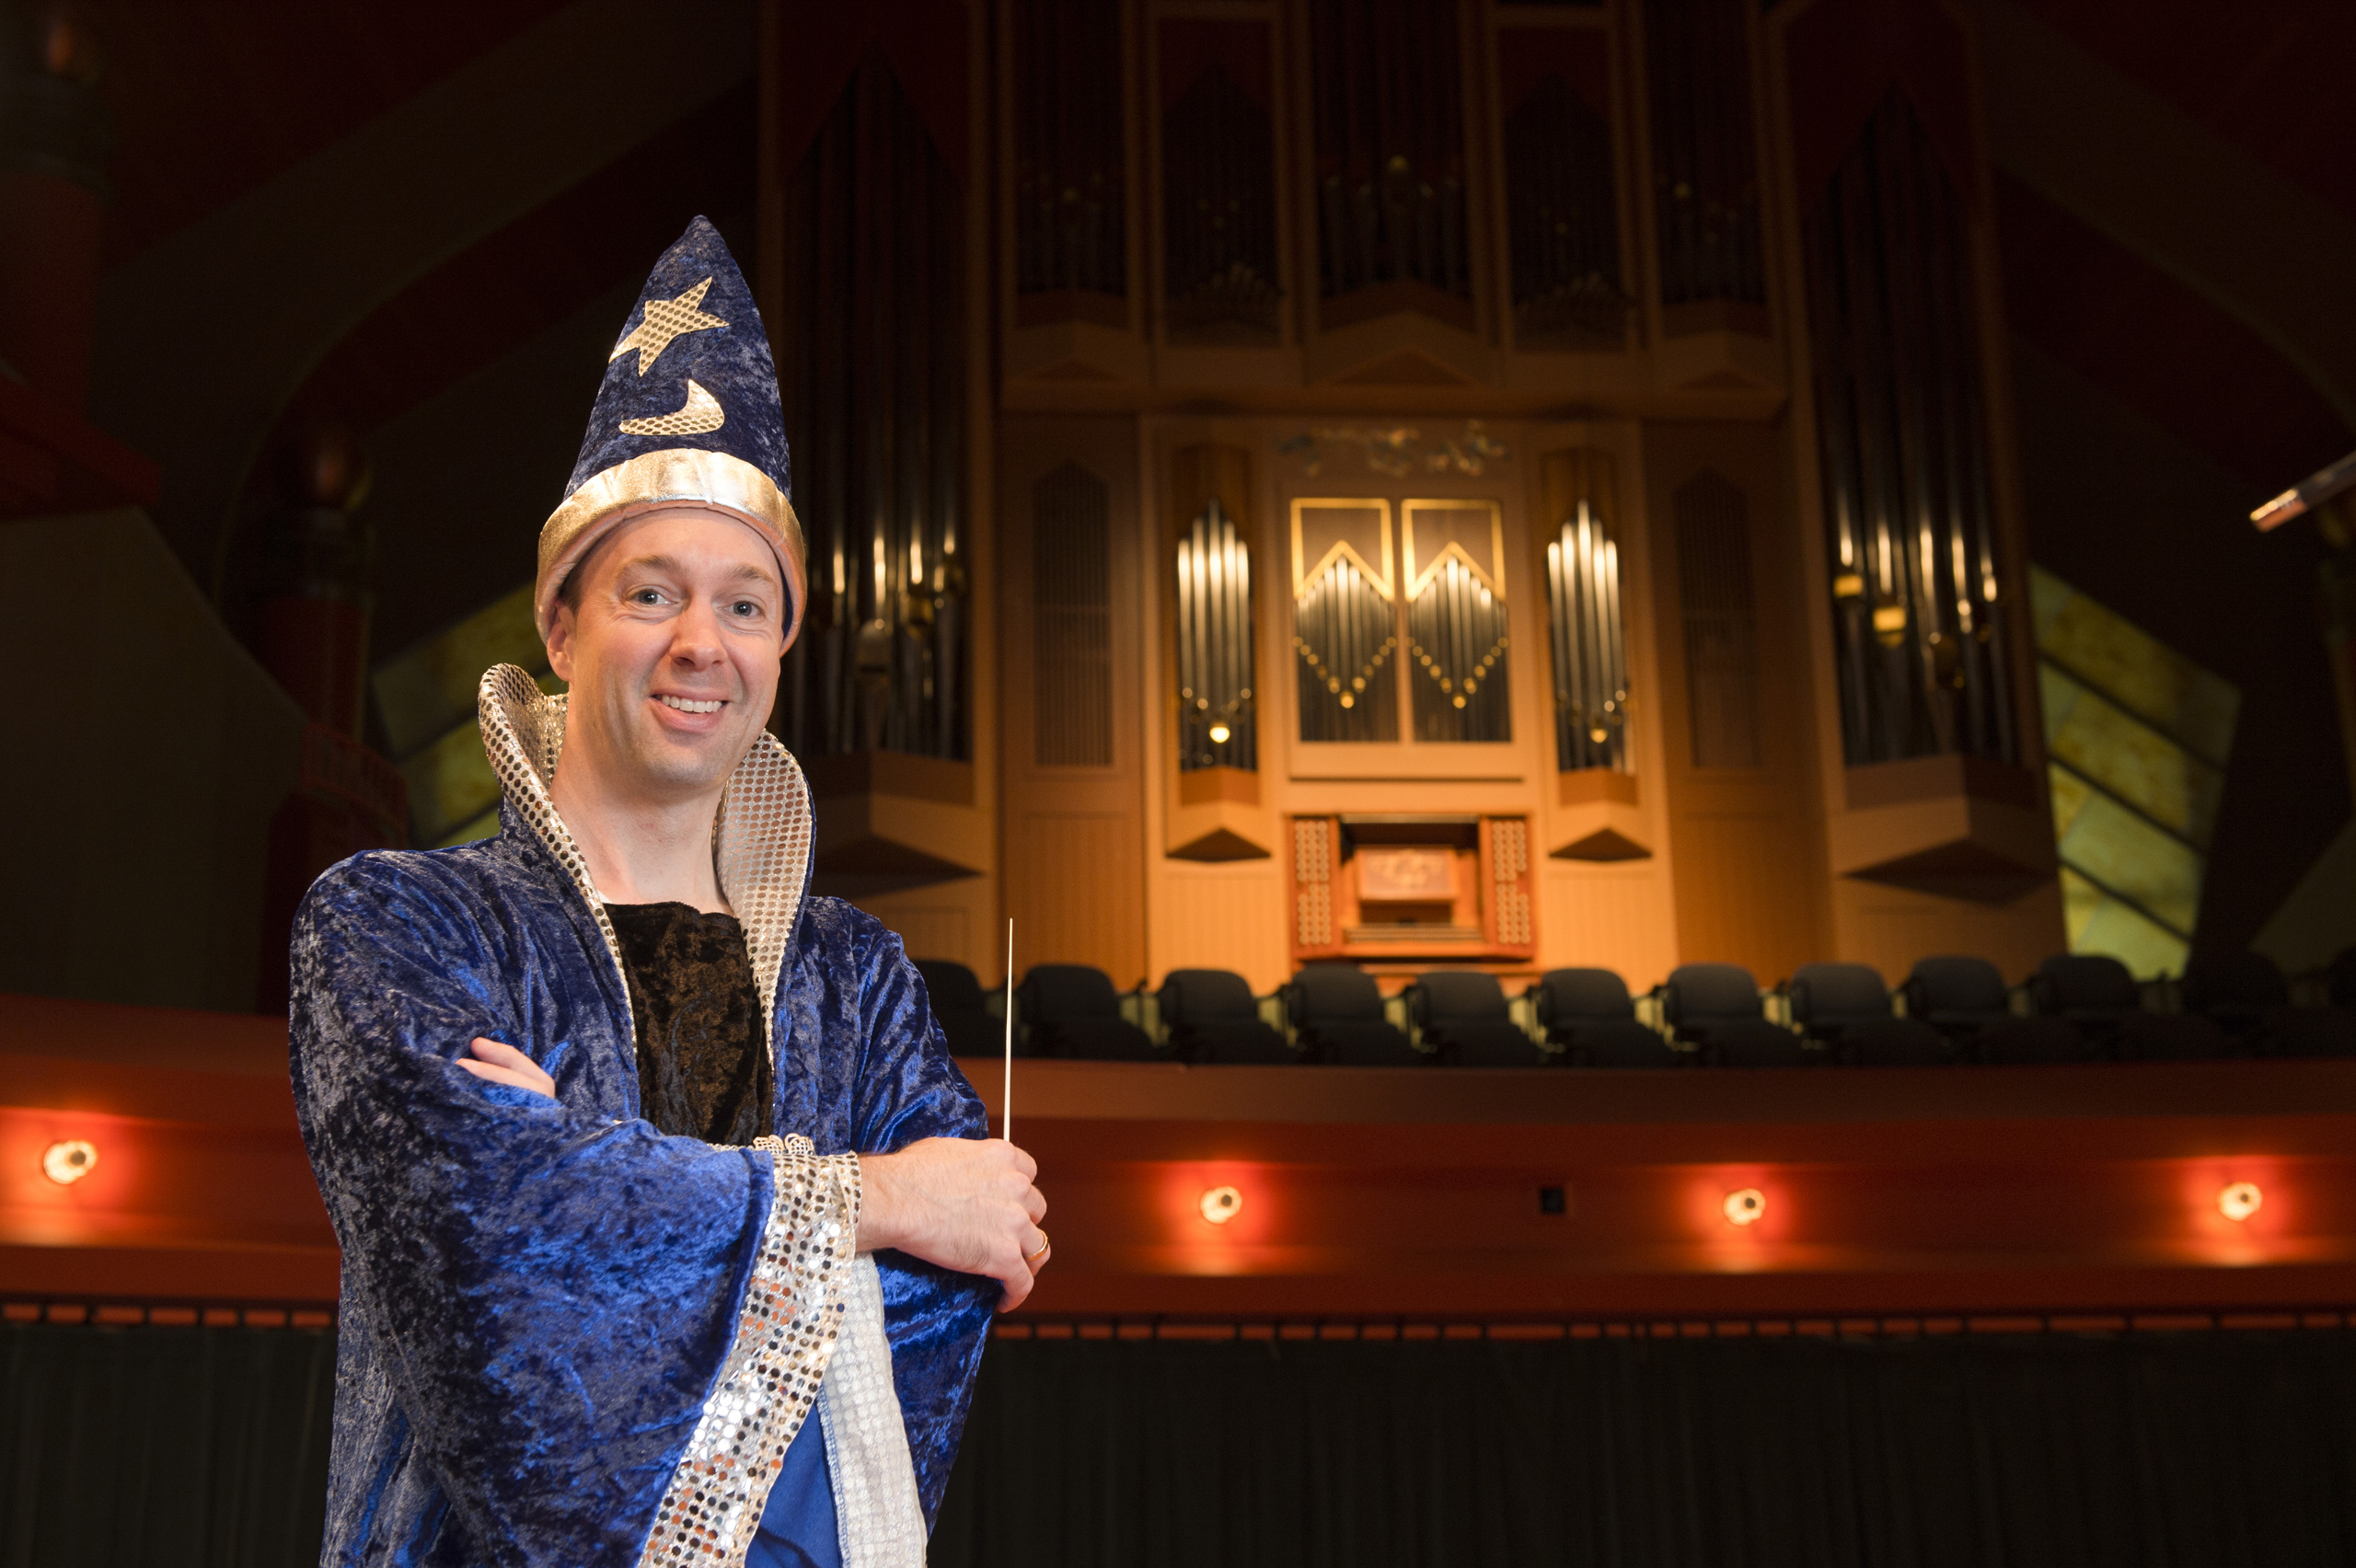 Clay Couturiaux in a wizard costume, cape and hat